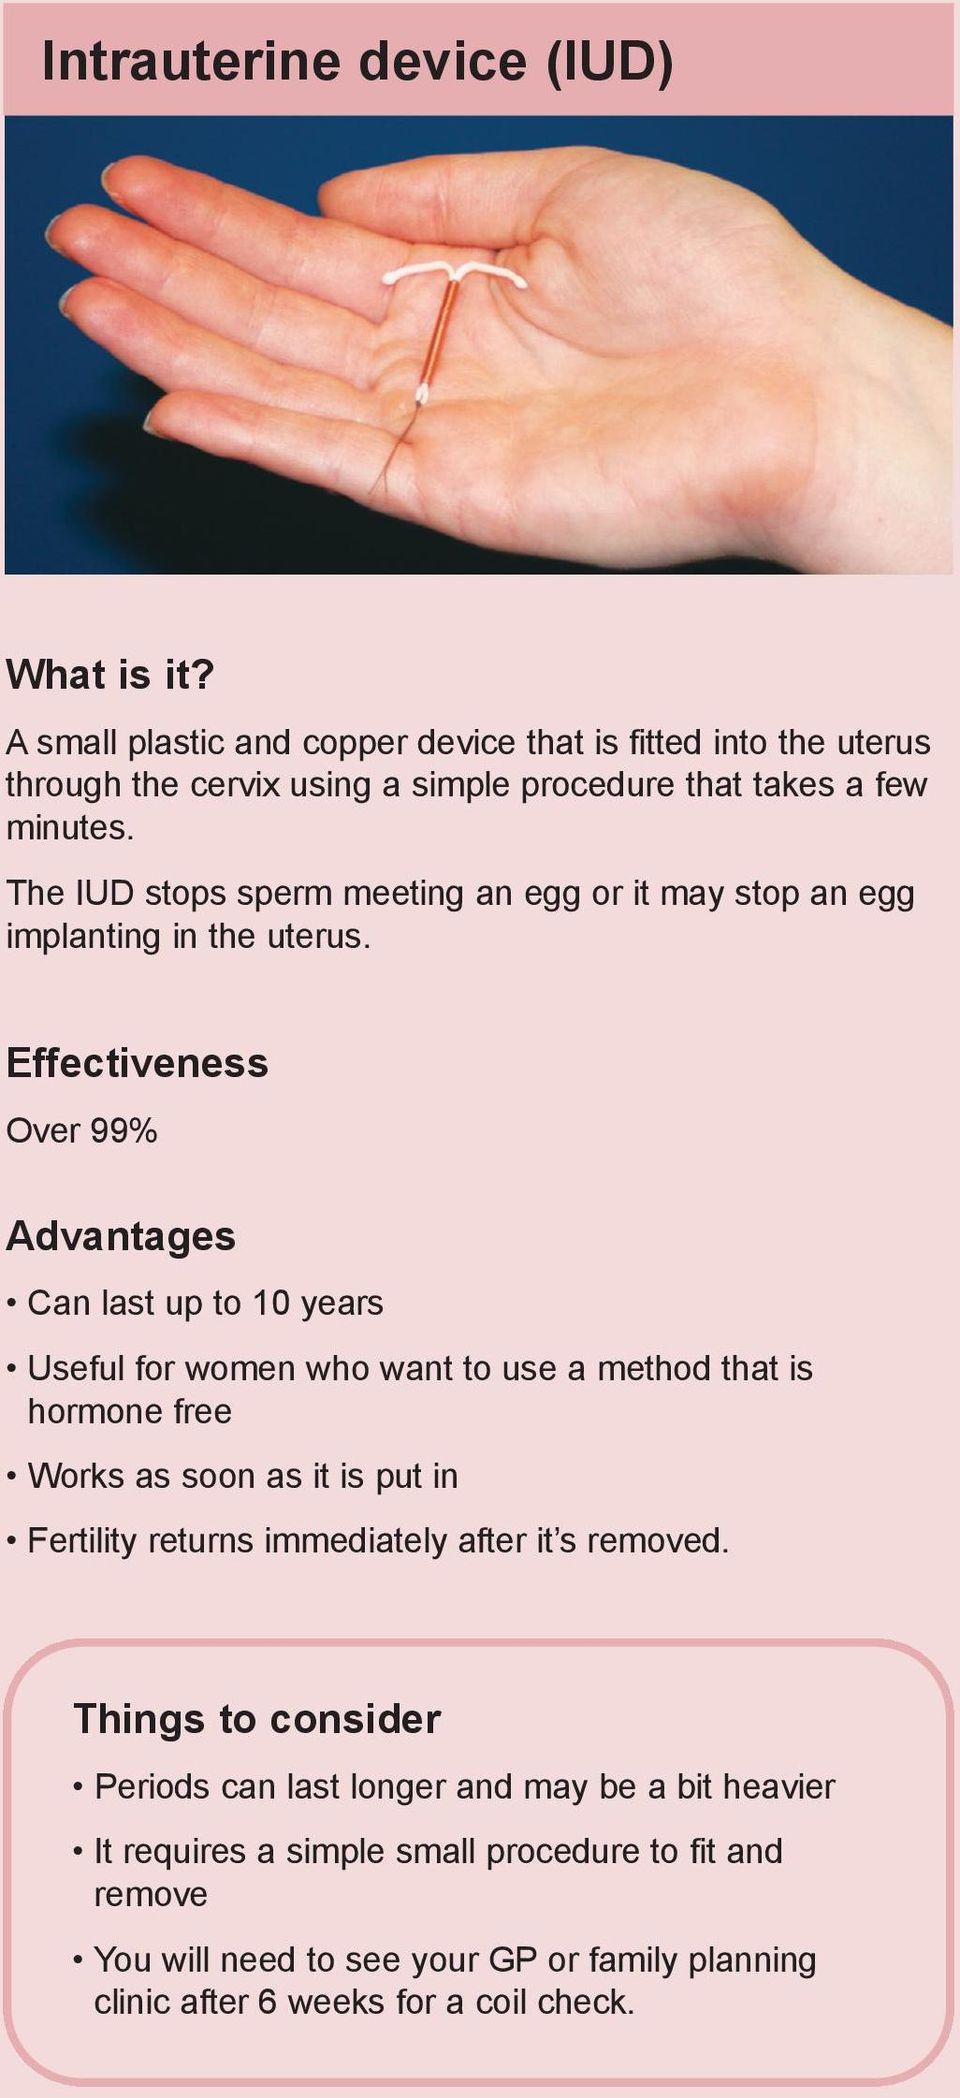 The IUD stops sperm meeting an egg or it may stop an egg implanting in the uterus.